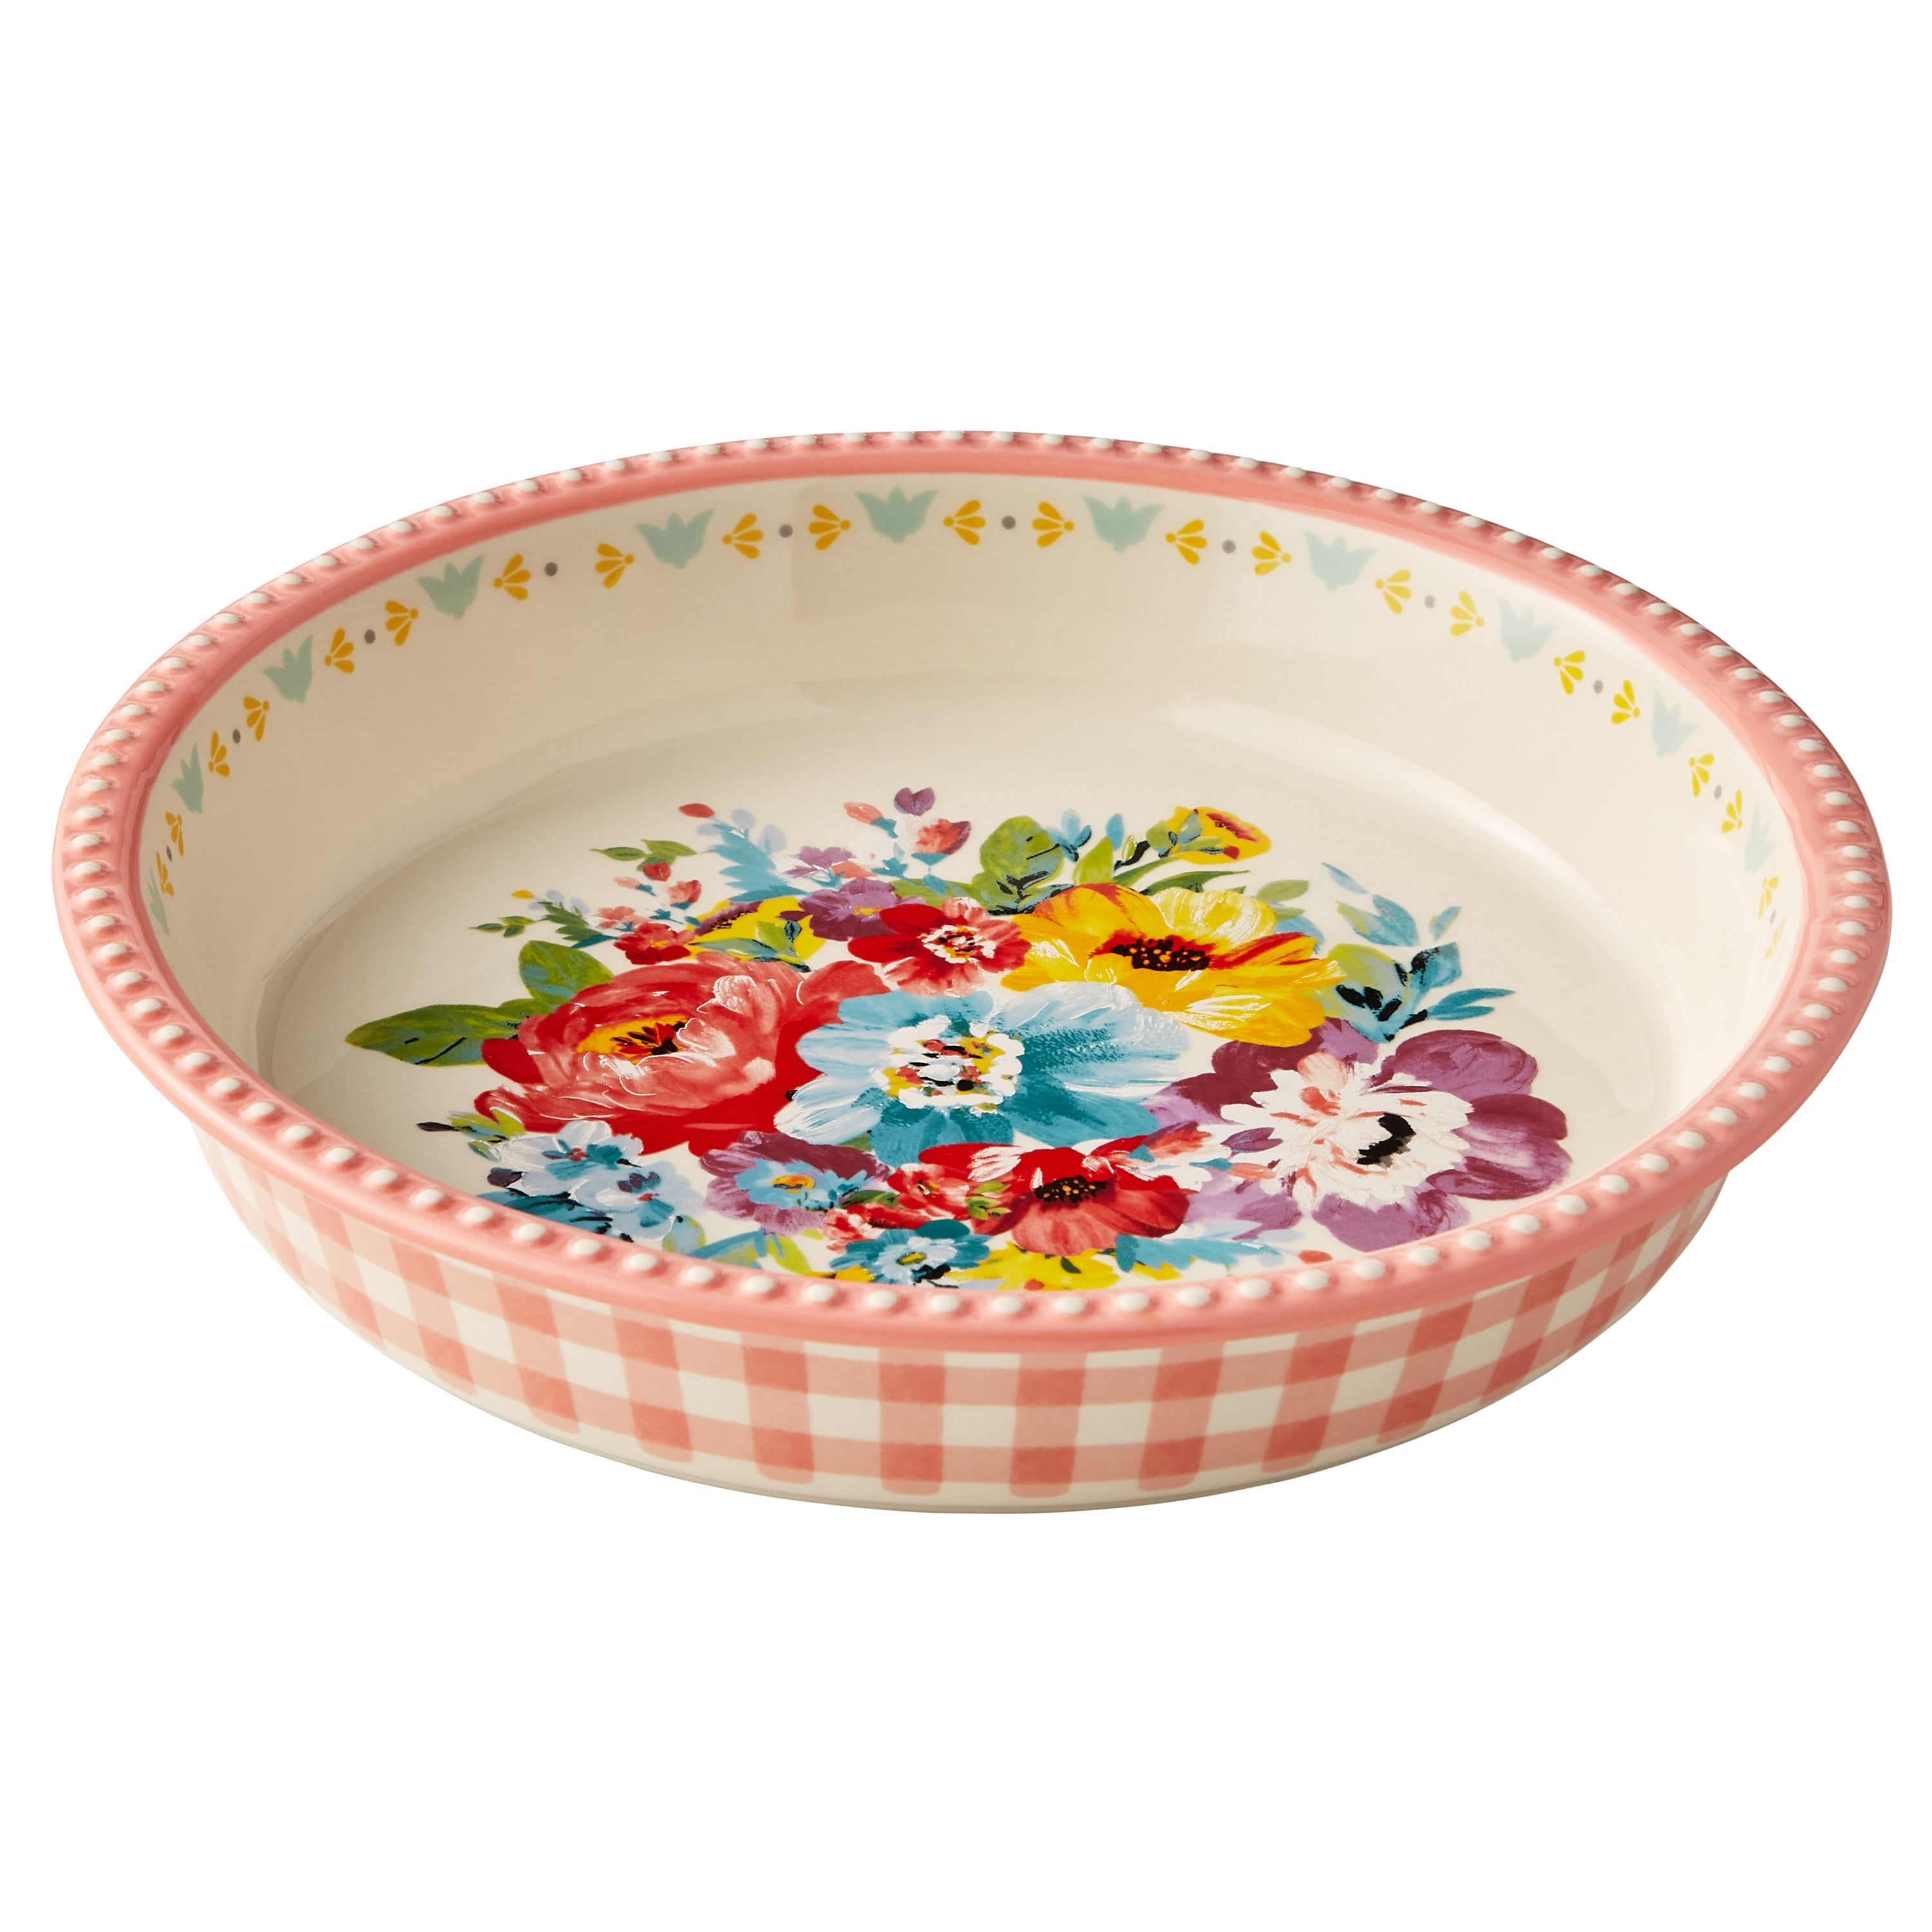 The Pioneer Woman Sweet Romance Blossoms Ceramic Pie Plate - 9 in